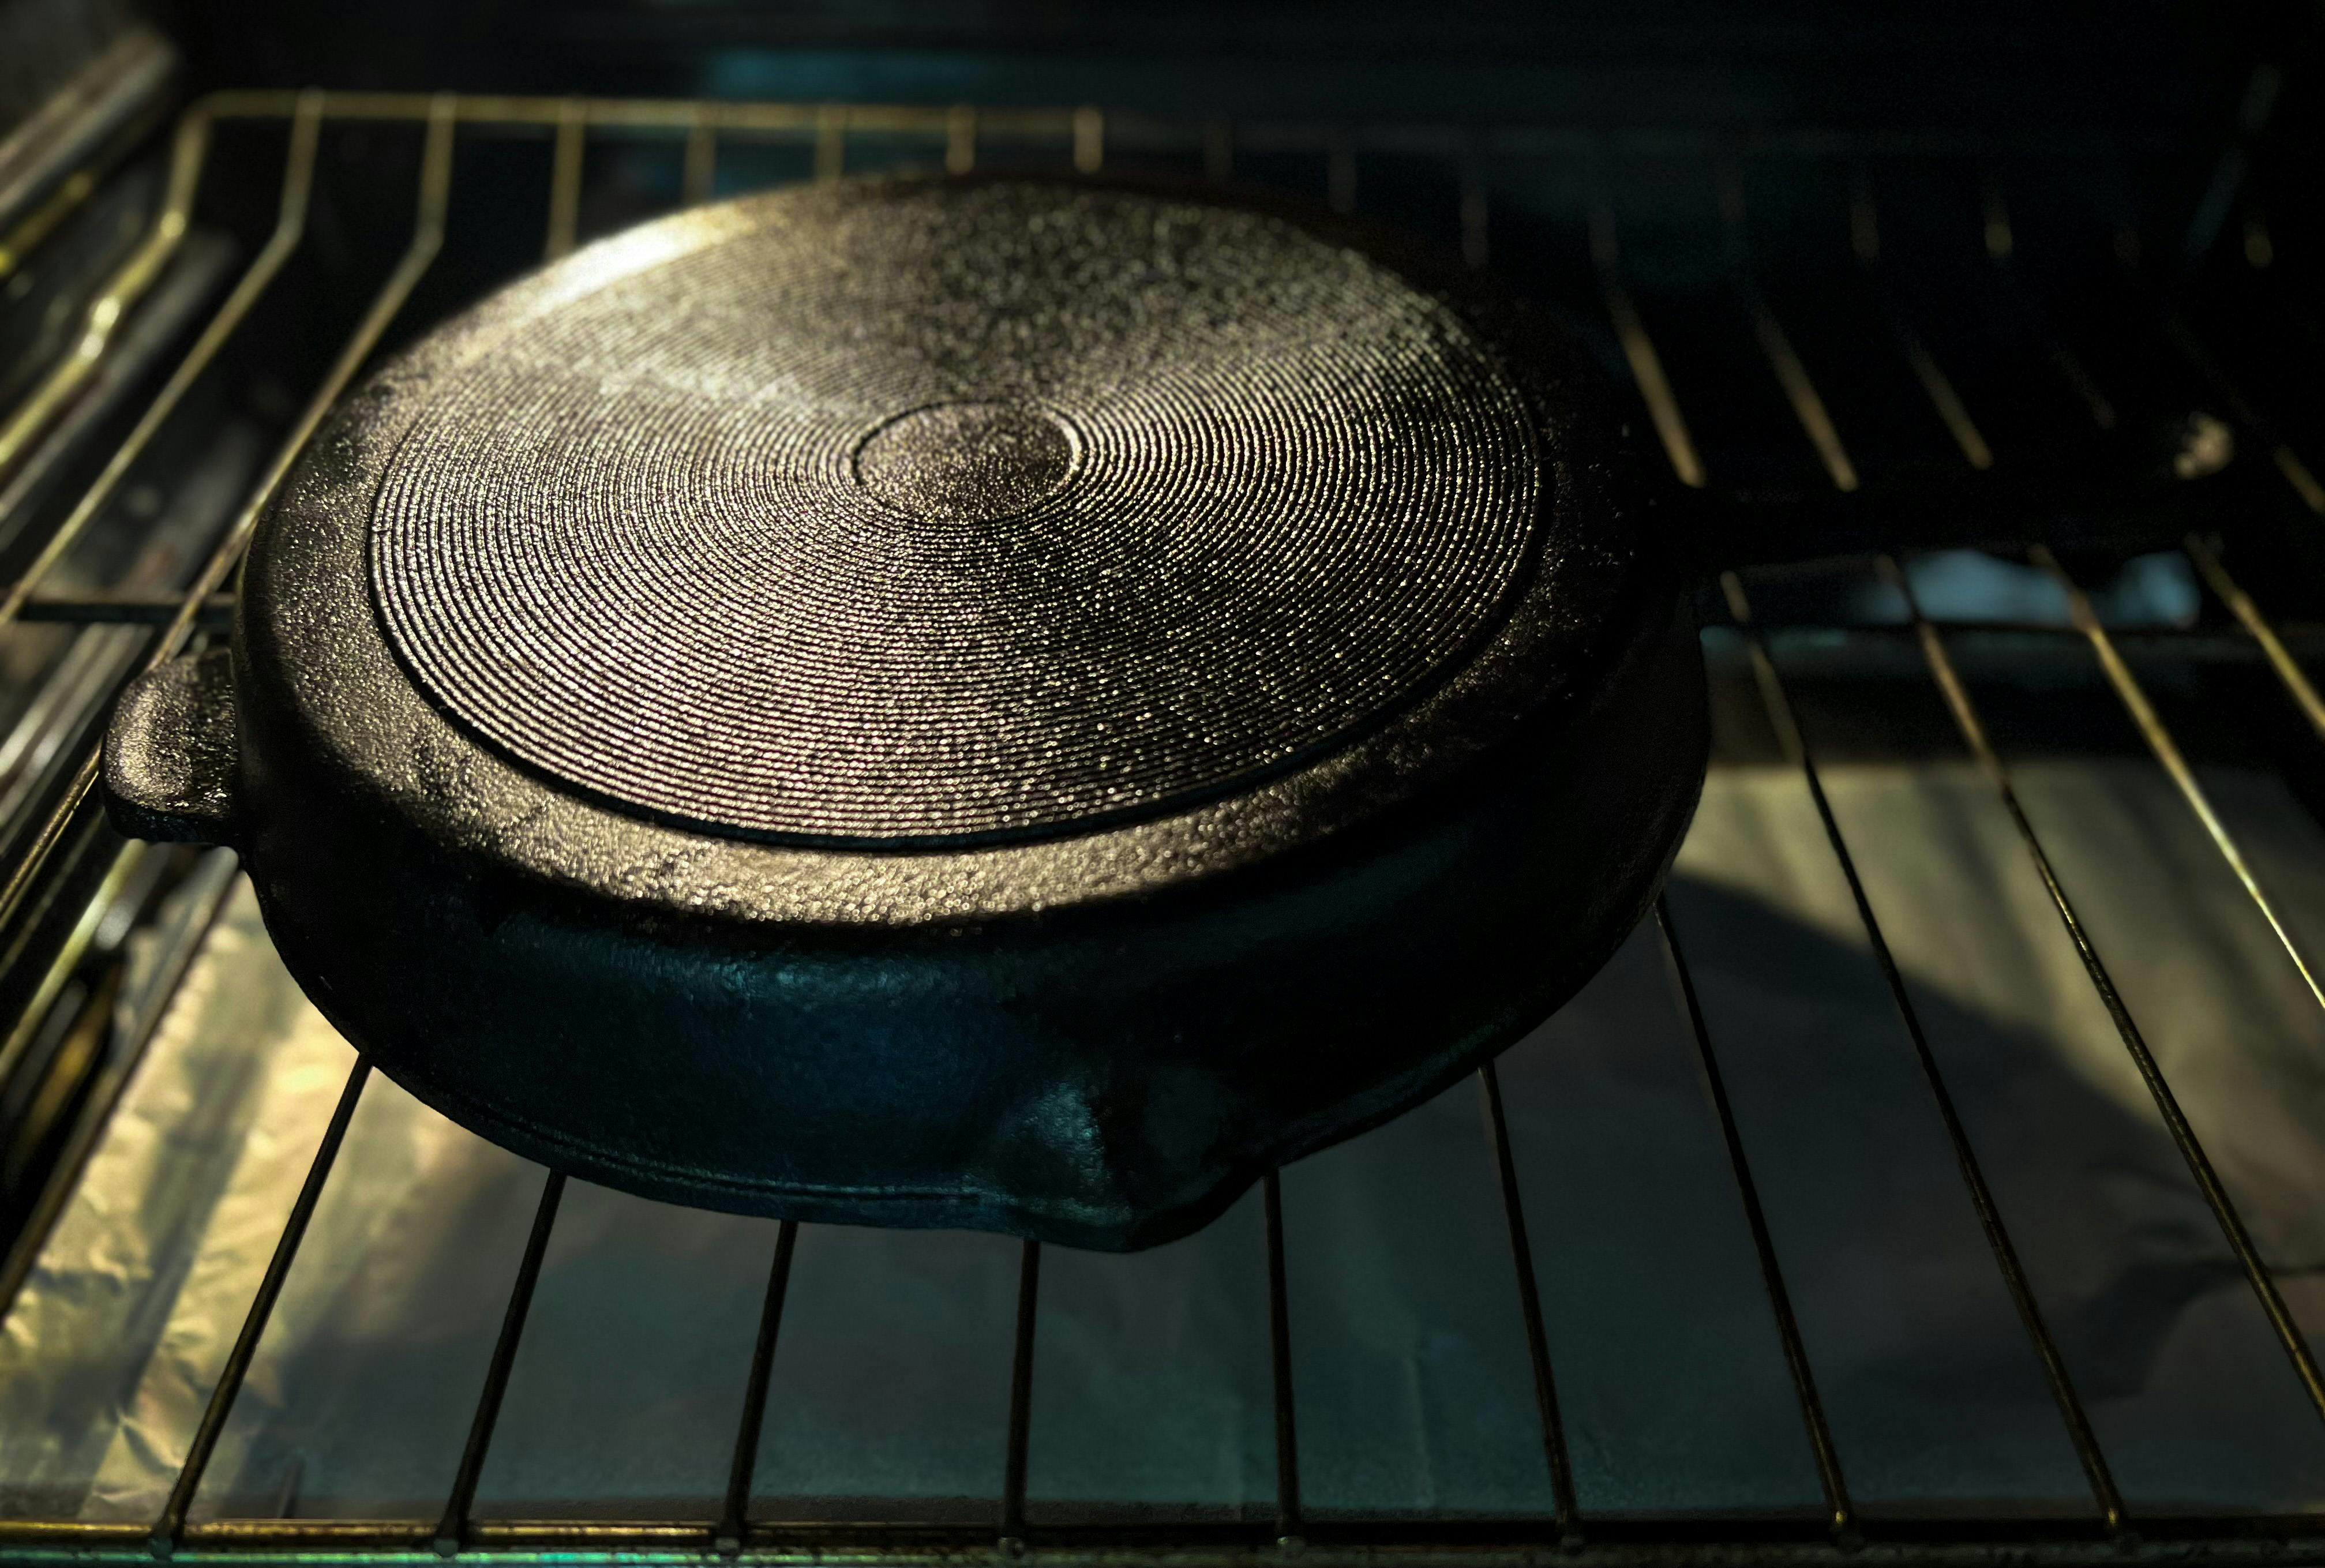 Cast iron skillet in the oven